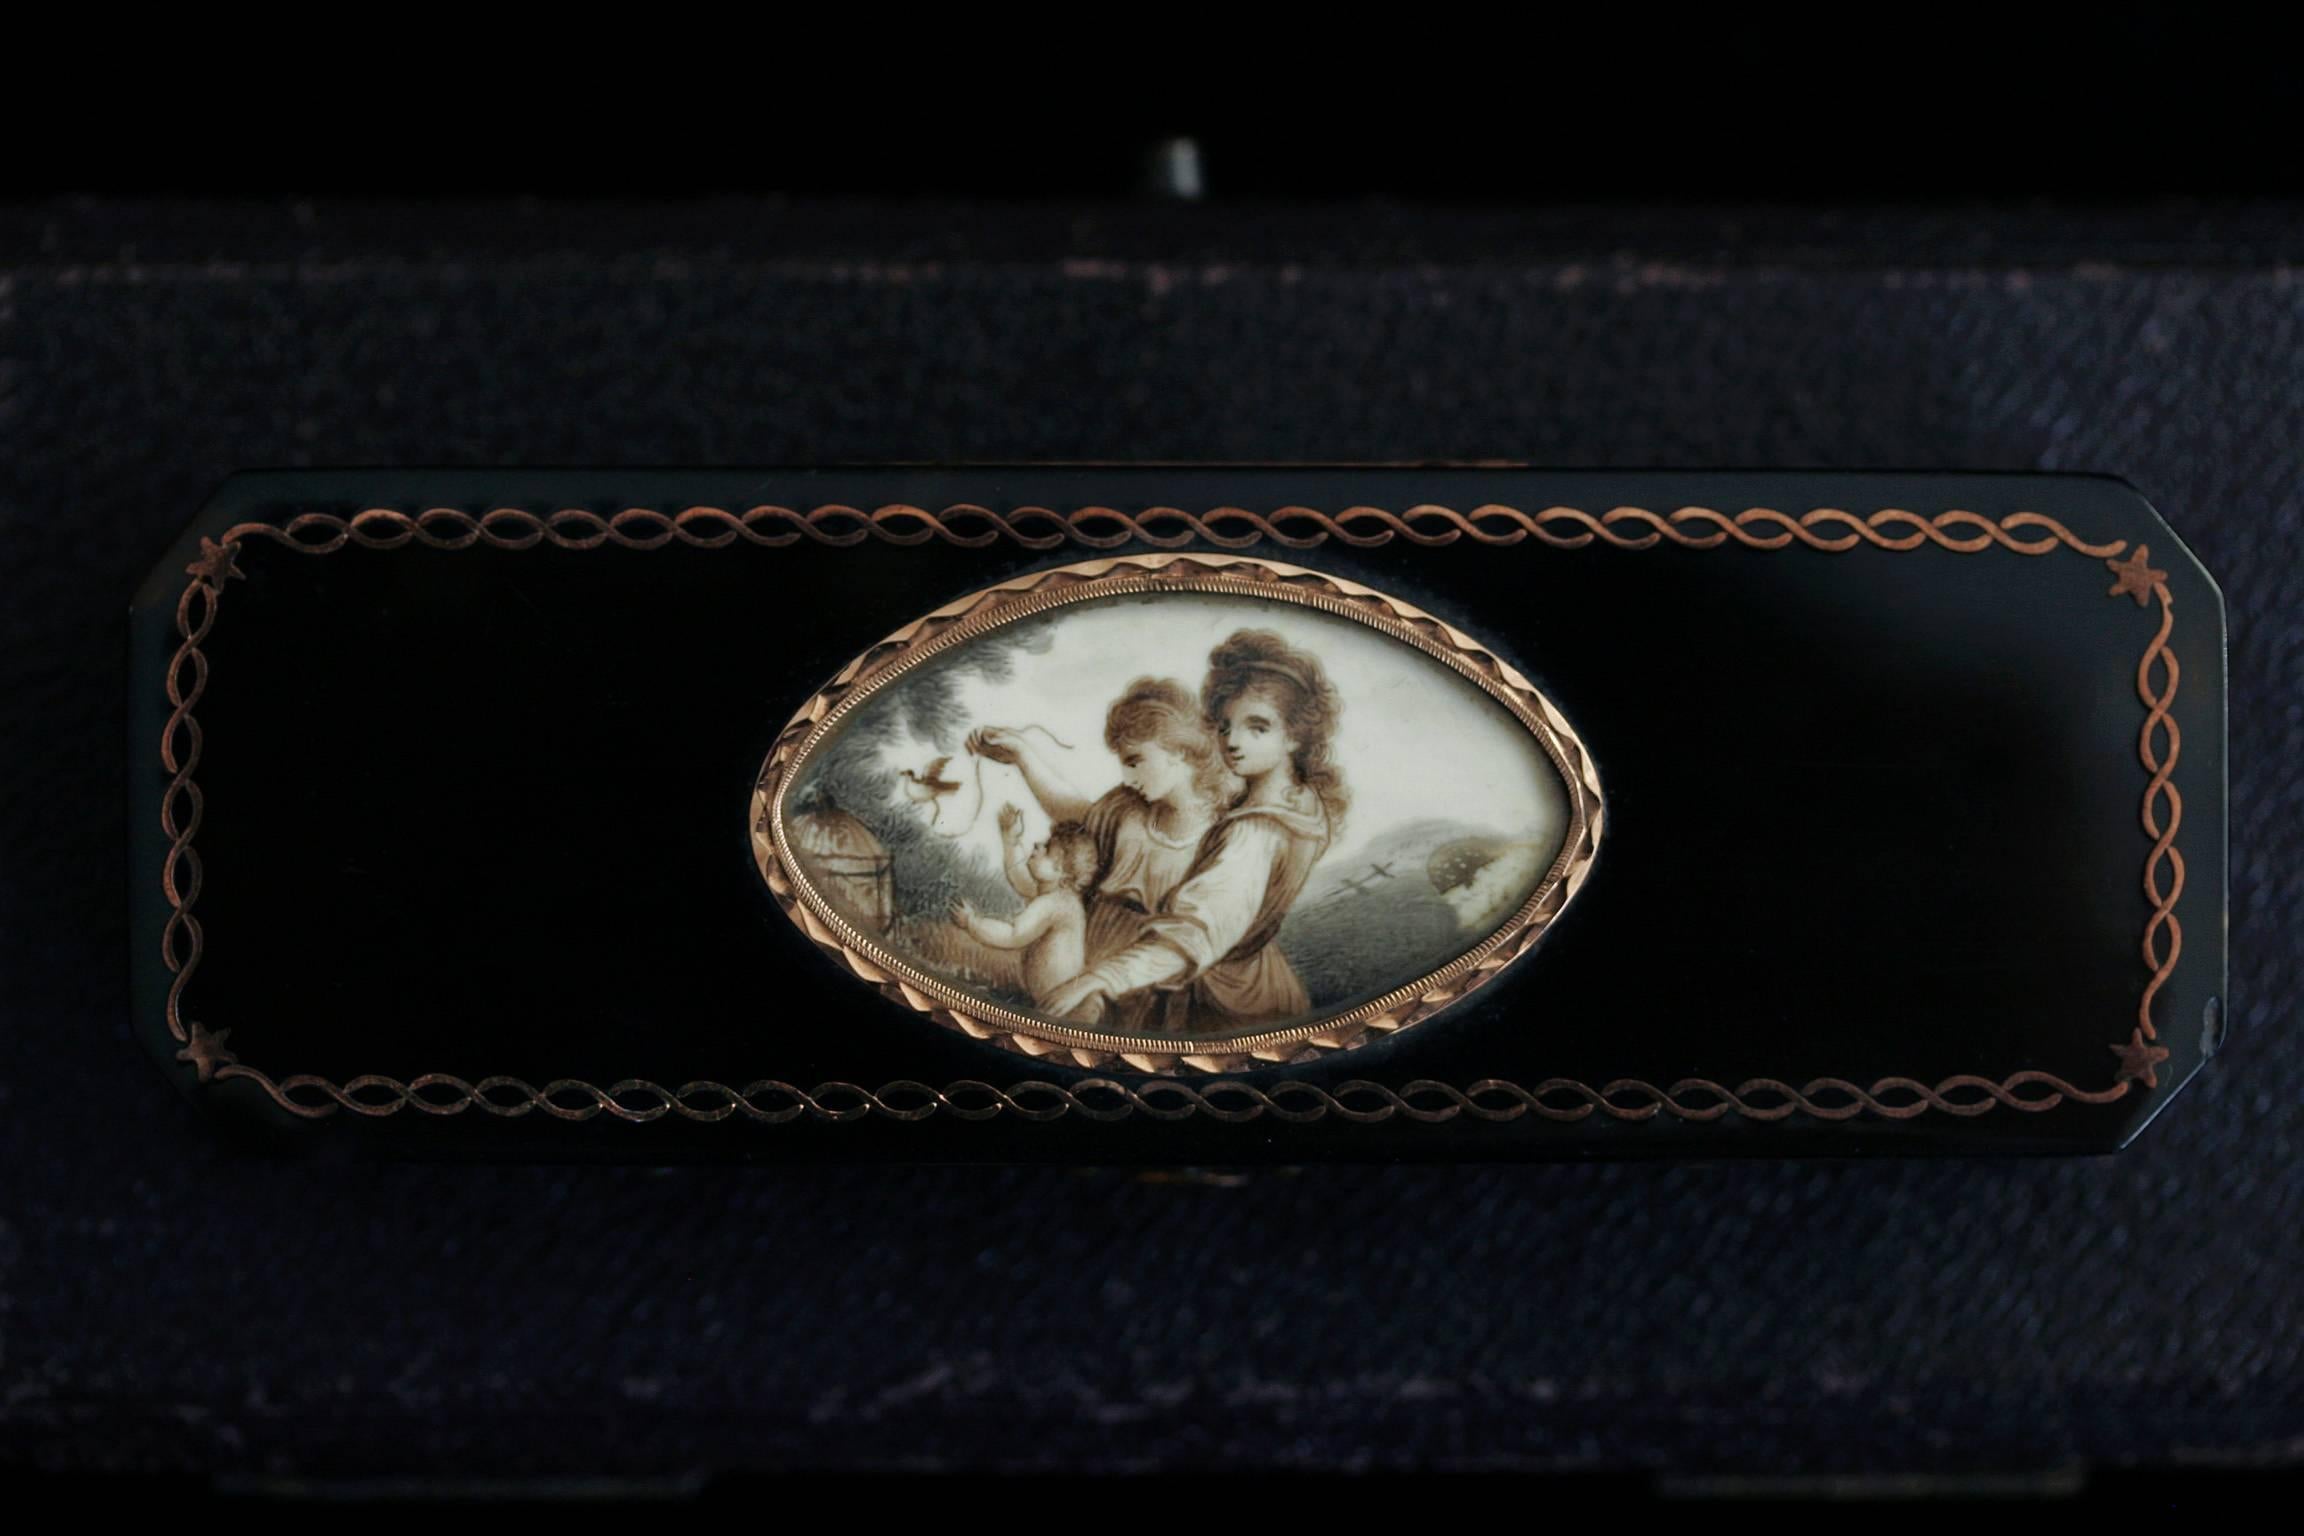 C.1780. An exquisite Georgian period faux tortoiseshell toothpick case with a very finely painted sepia miniature on the lid. The miniature painting depicts two young ladies and a child with a bird, attached to a ribbon, flying away from a cage. The